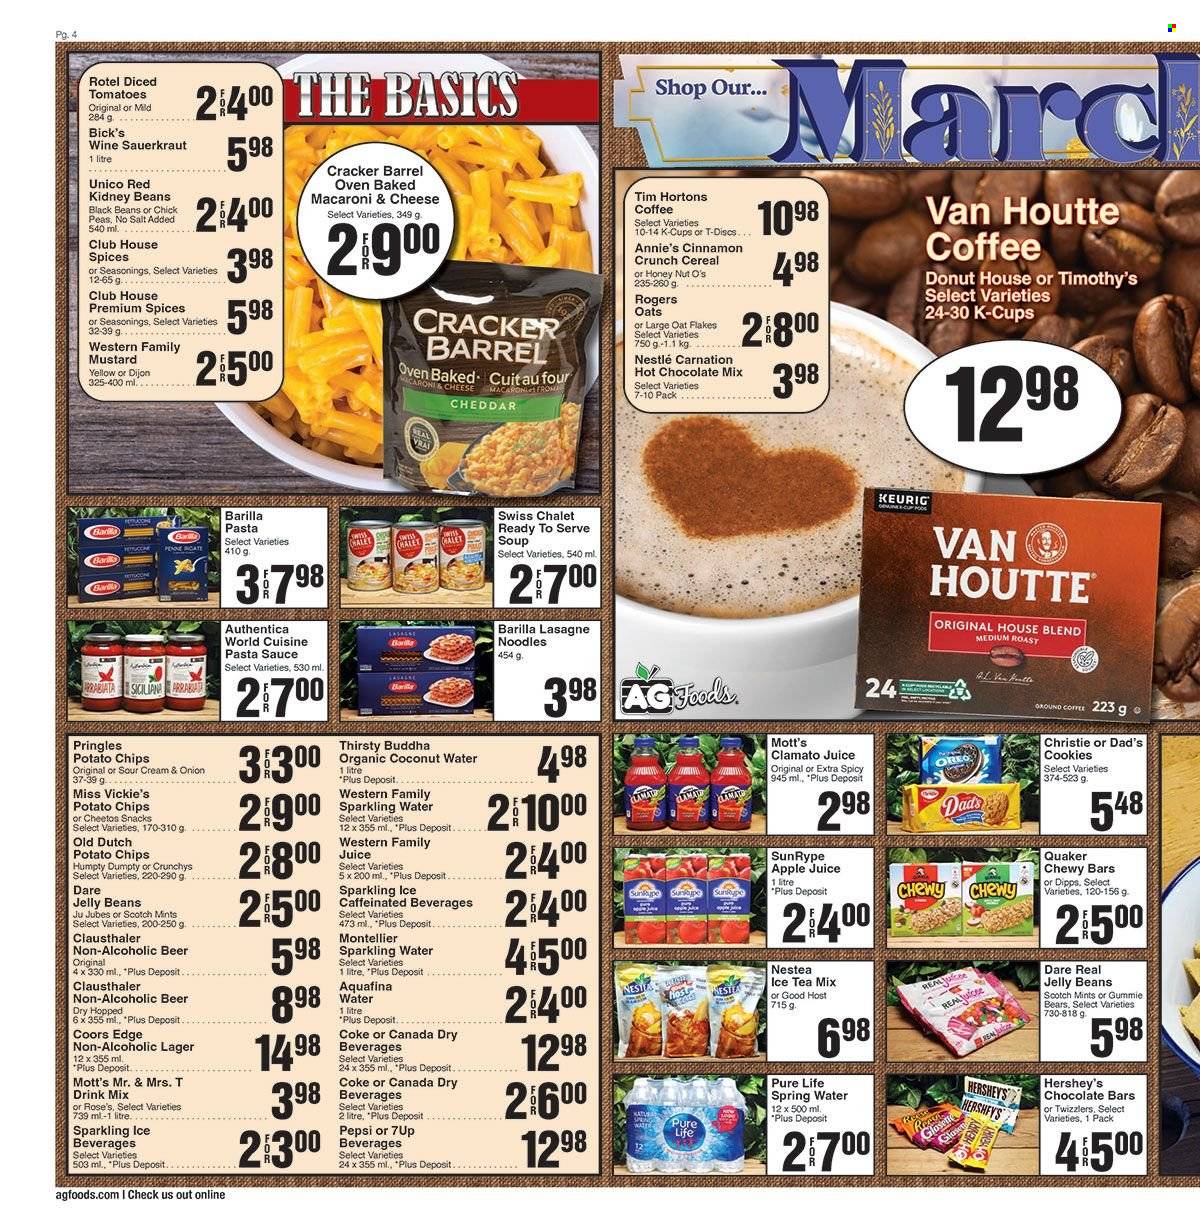 thumbnail - AG Foods Flyer - March 26, 2023 - April 01, 2023 - Sales products - Mott's, macaroni & cheese, pasta sauce, soup, sauce, Quaker, noodles, Annie's, roast, Hershey's, cookies, snack, crackers, jelly beans, chocolate bar, potato chips, Pringles, Cheetos, chips, oats, black beans, sauerkraut, kidney beans, diced tomatoes, cereals, cinnamon, mustard, apple juice, Canada Dry, Coca-Cola, Pepsi, juice, ice tea, Clamato, coconut water, 7UP, Coke, Aquafina, spring water, sparkling water, water, hot chocolate, tea, coffee, ground coffee, coffee capsules, K-Cups, Keurig, beer, Lager, Nestlé, Oreo, Coors, Barilla. Page 4.